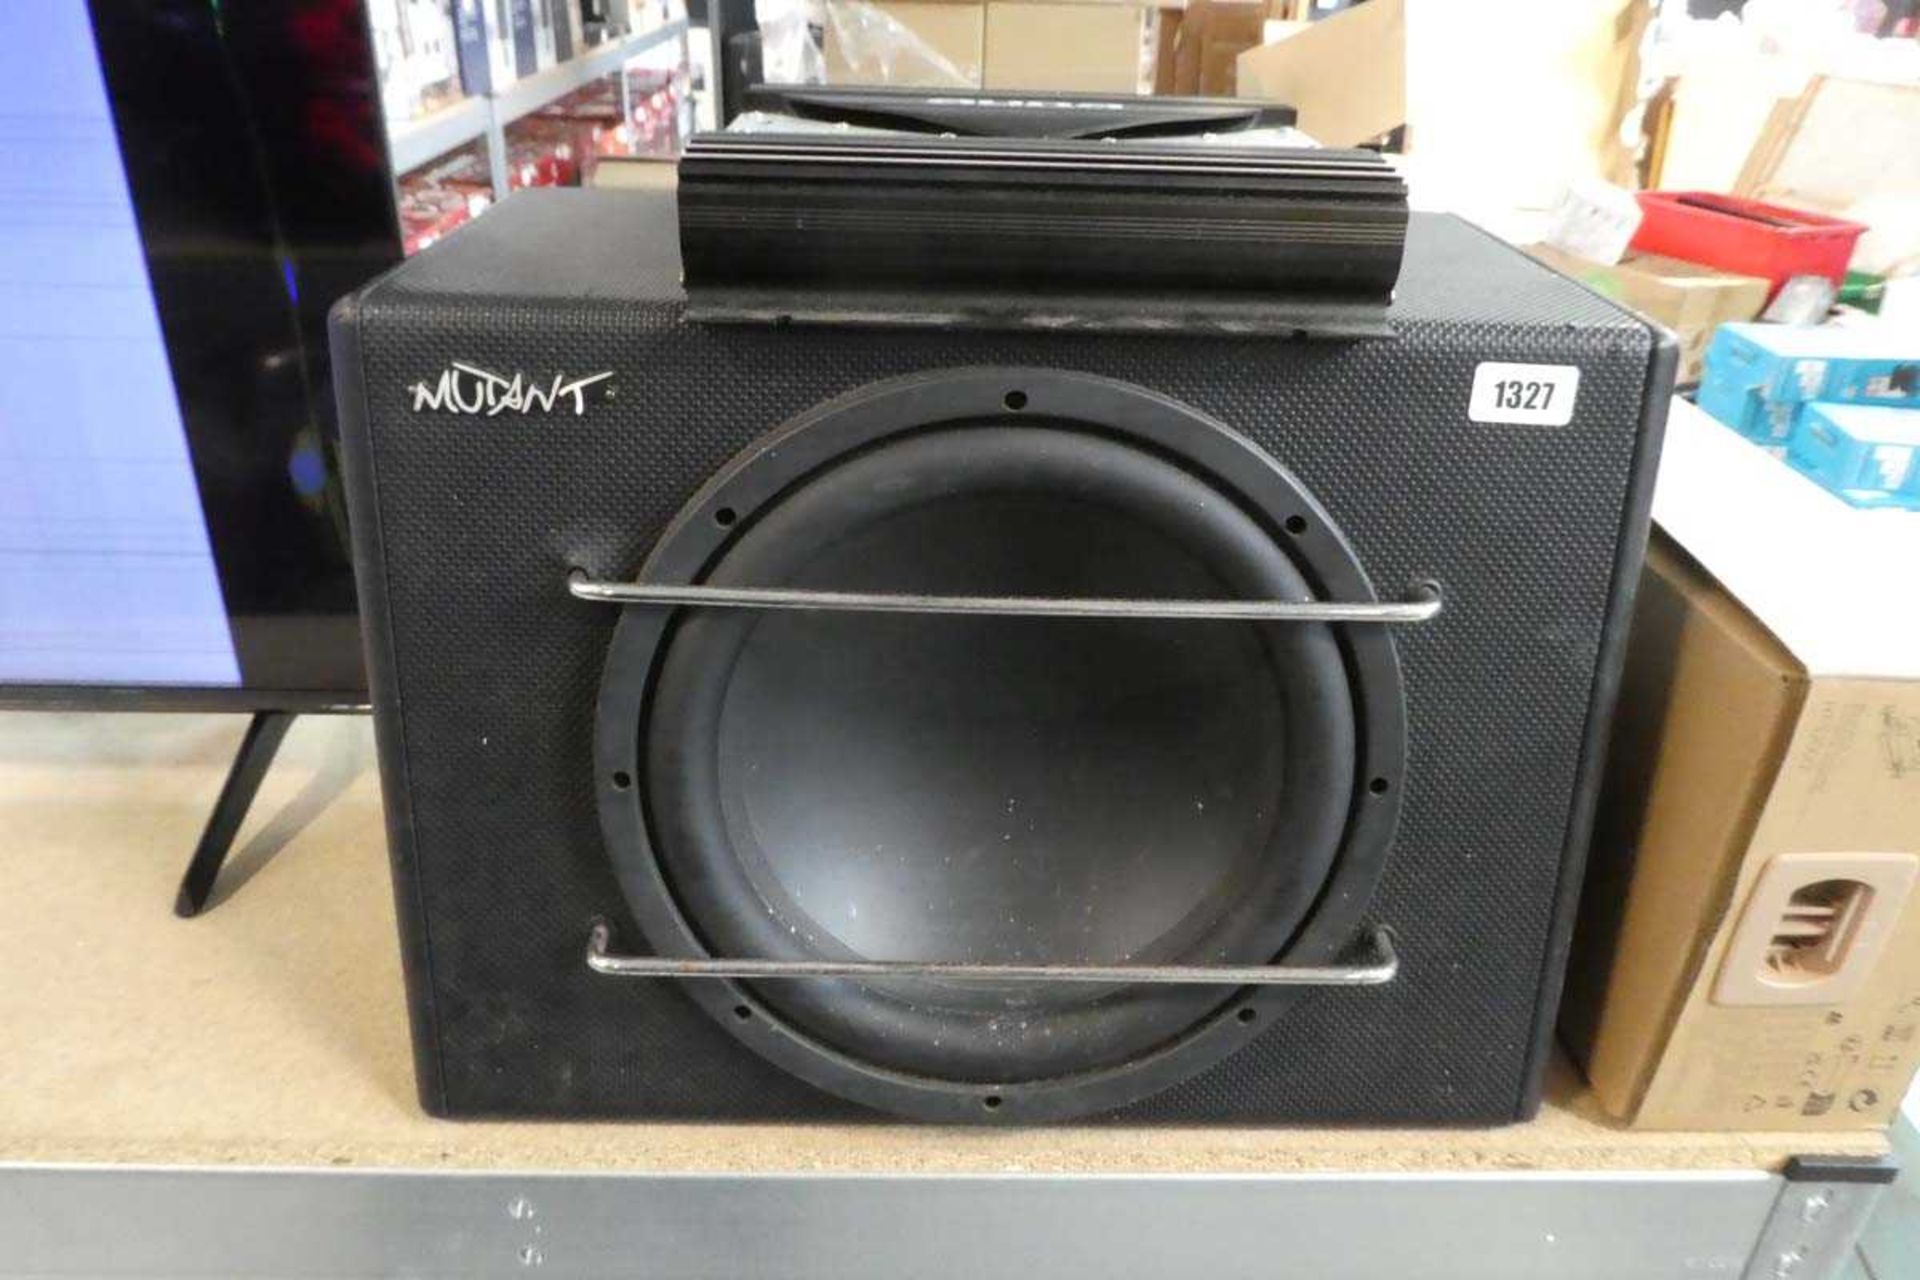 Mutant 12" car sub woofer with Auna 2 channel amplifier